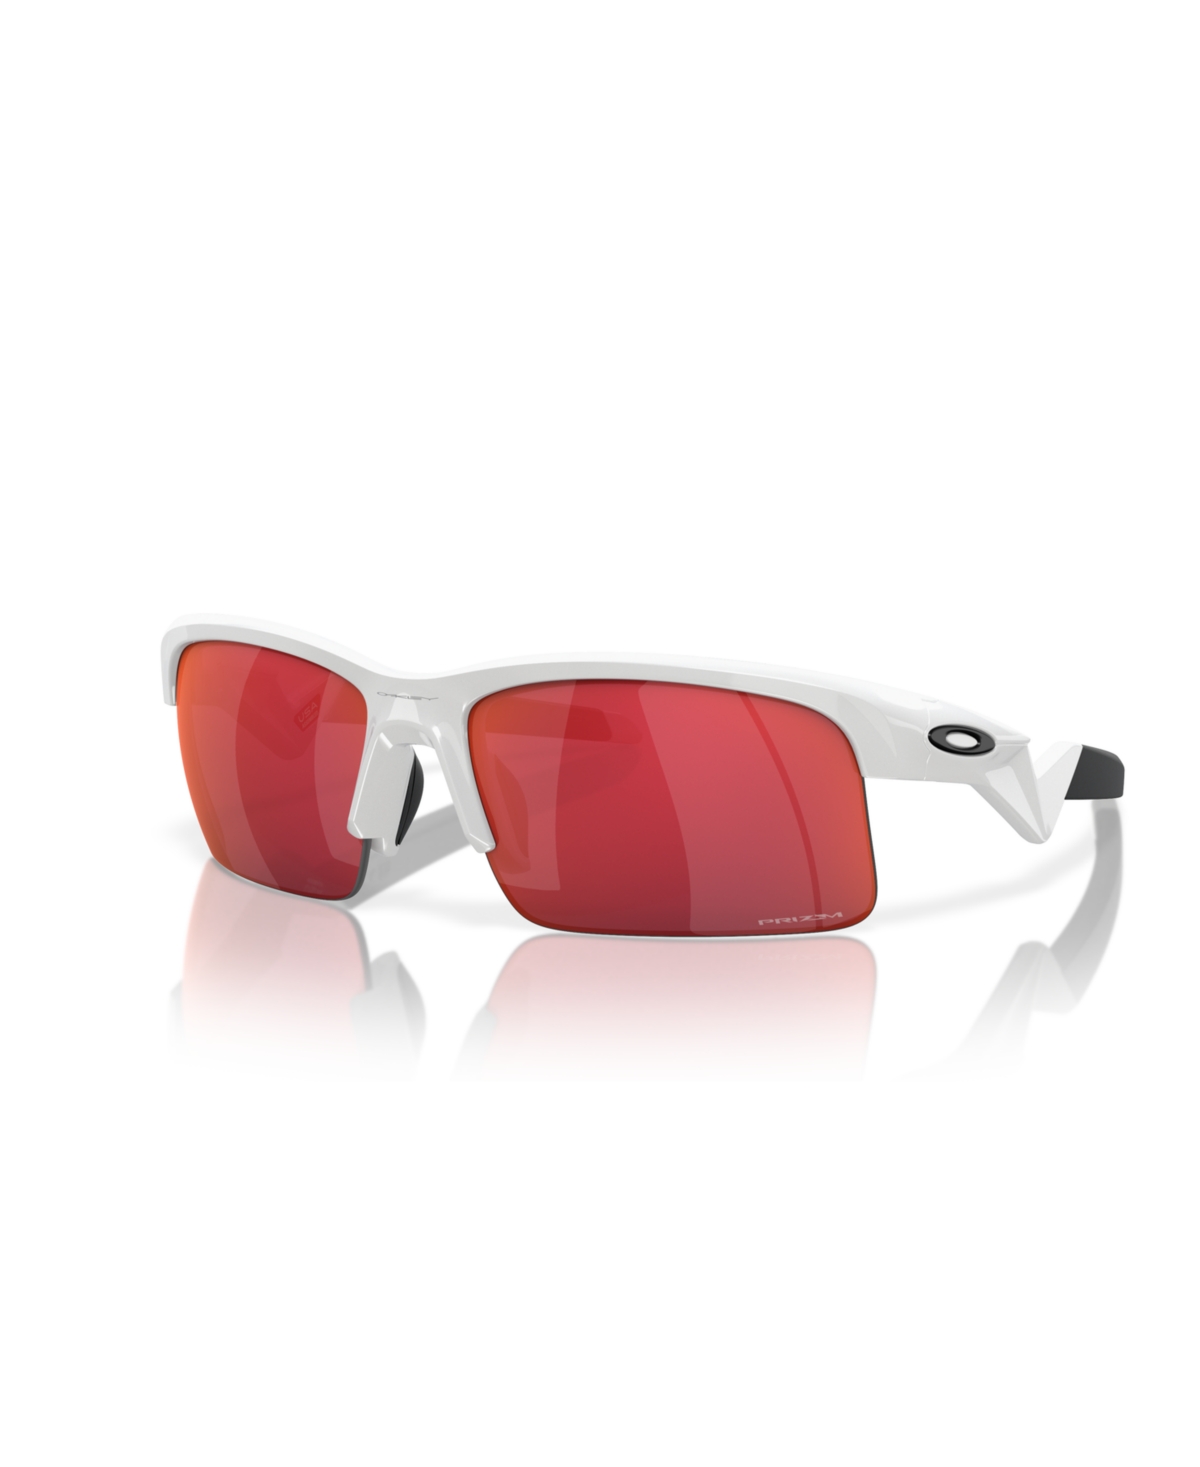 Oakley Jr Kid's Sunglasses, Capacitor Youth Fit Oj9013 In Polished White,red